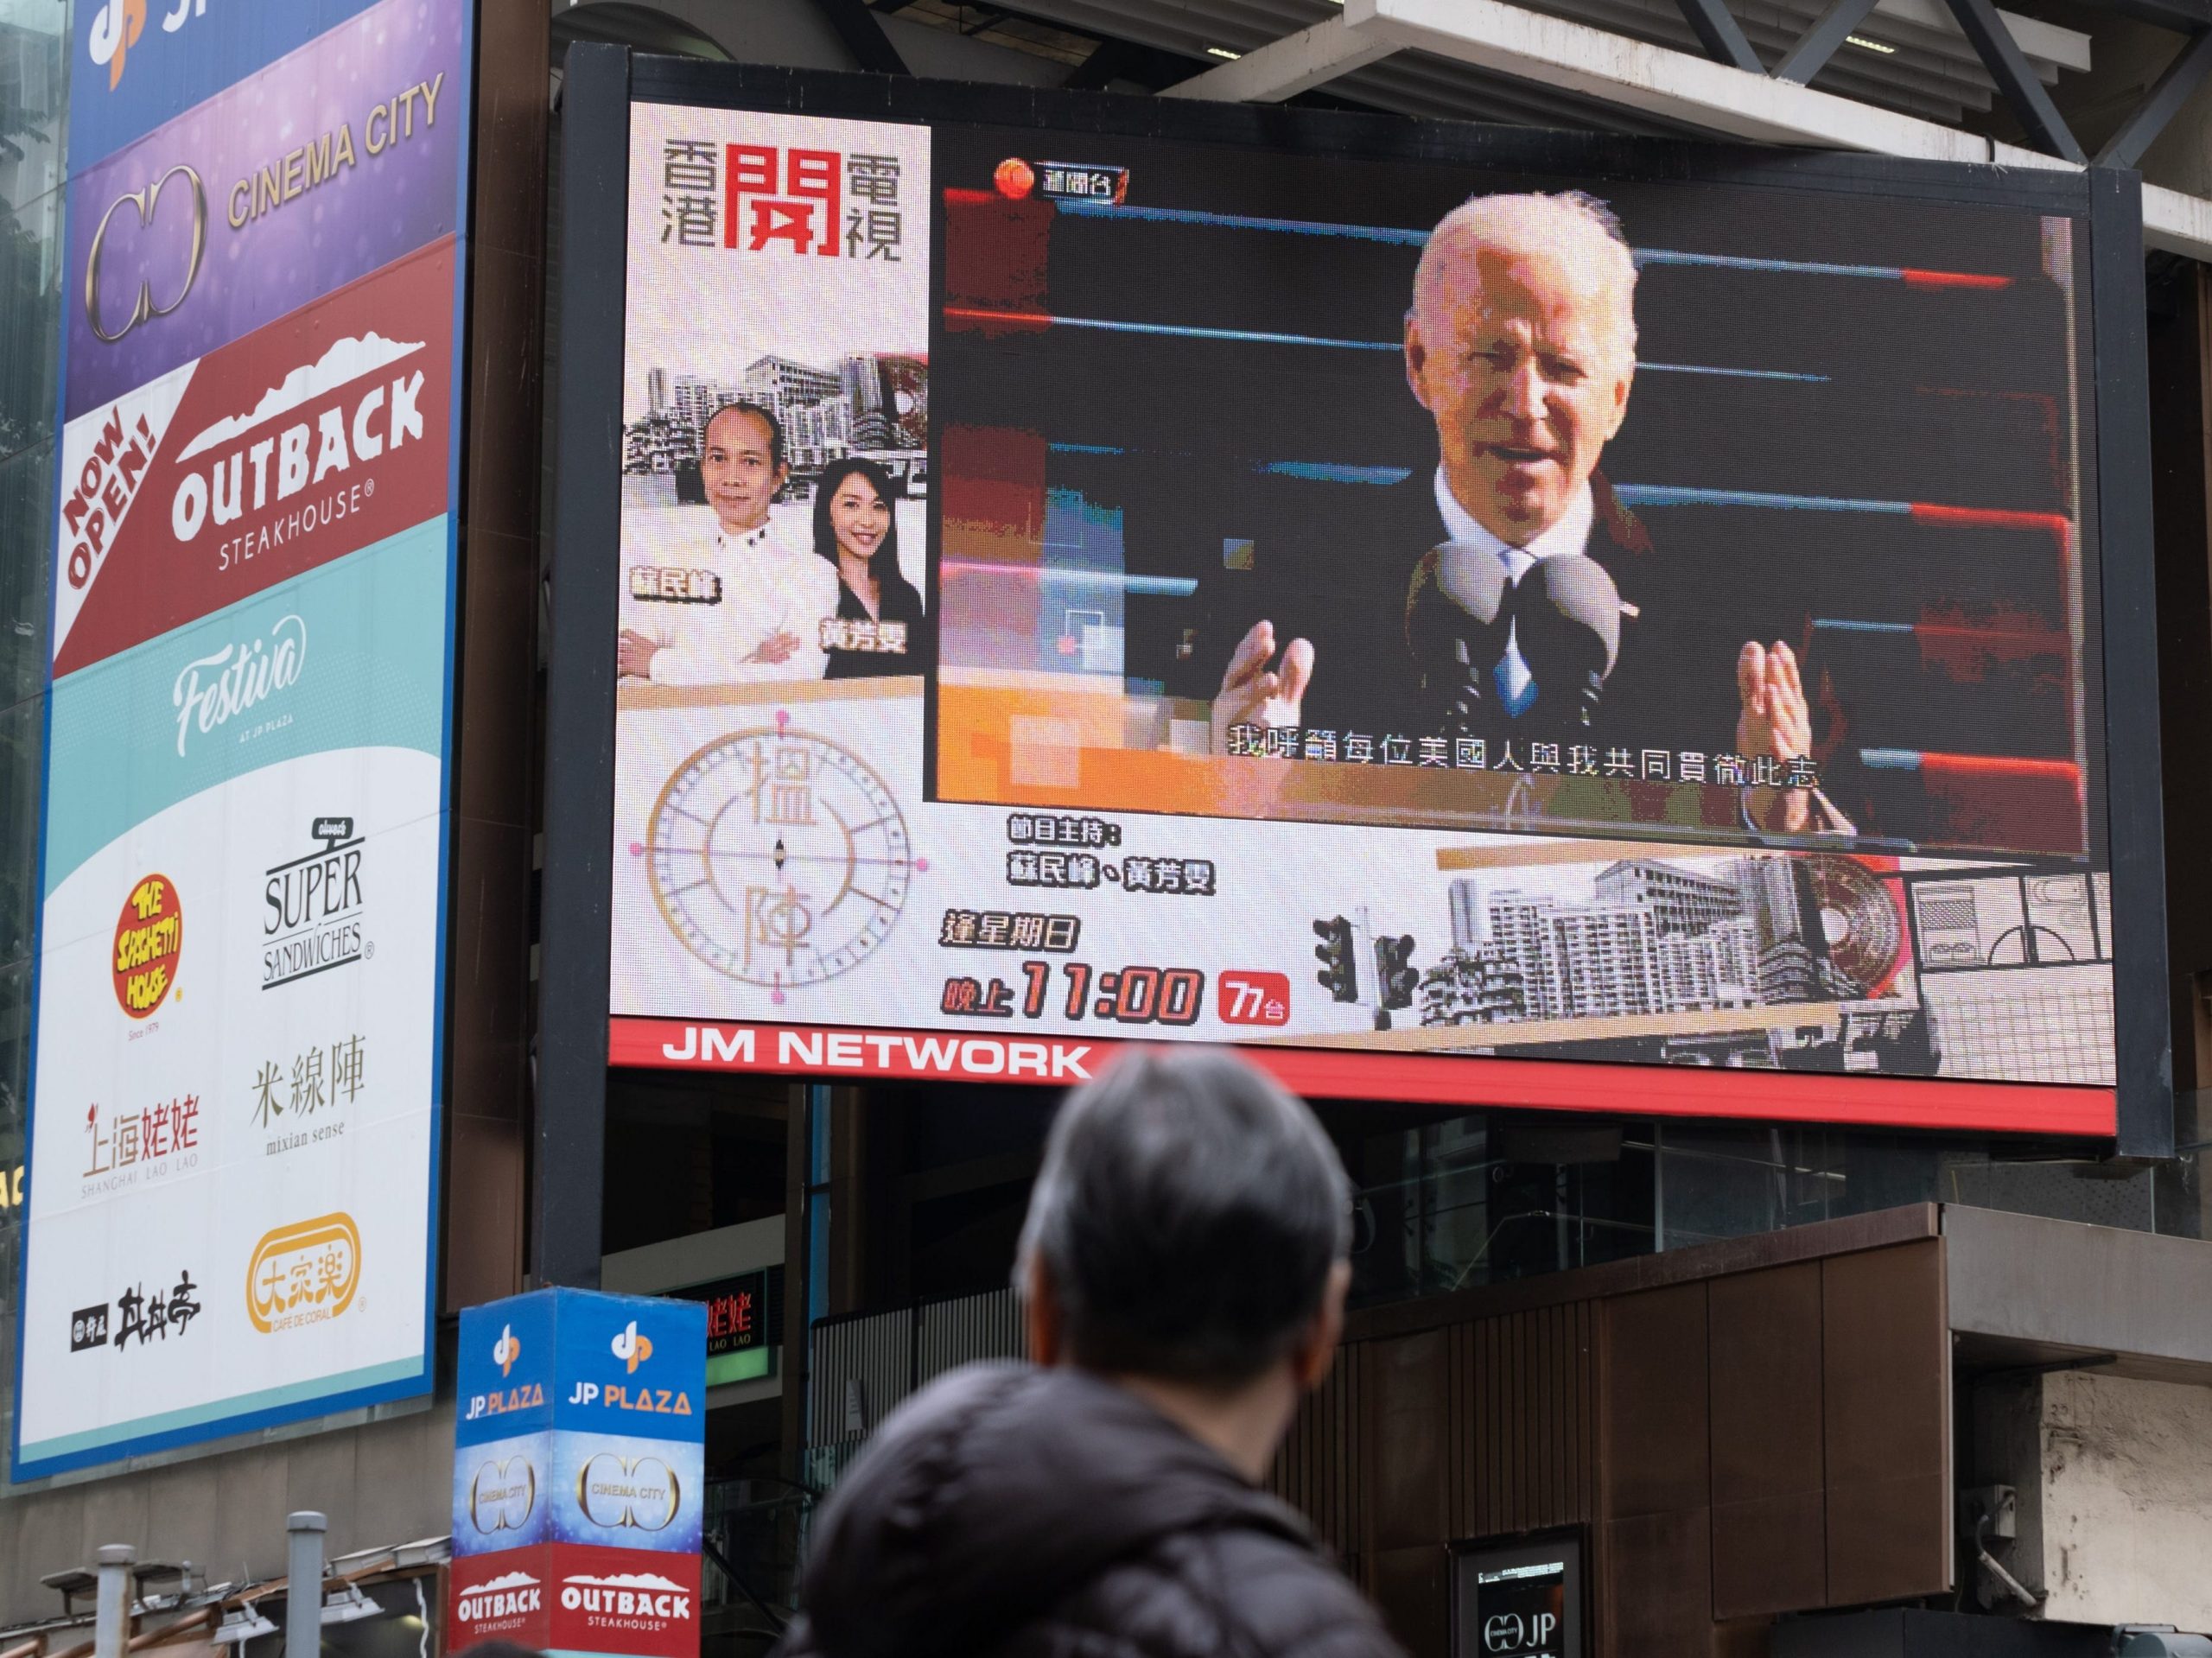 A man is seen watching the news report of the inauguration of President Biden on a large screen in Hong Kong on January 21st, 2021.